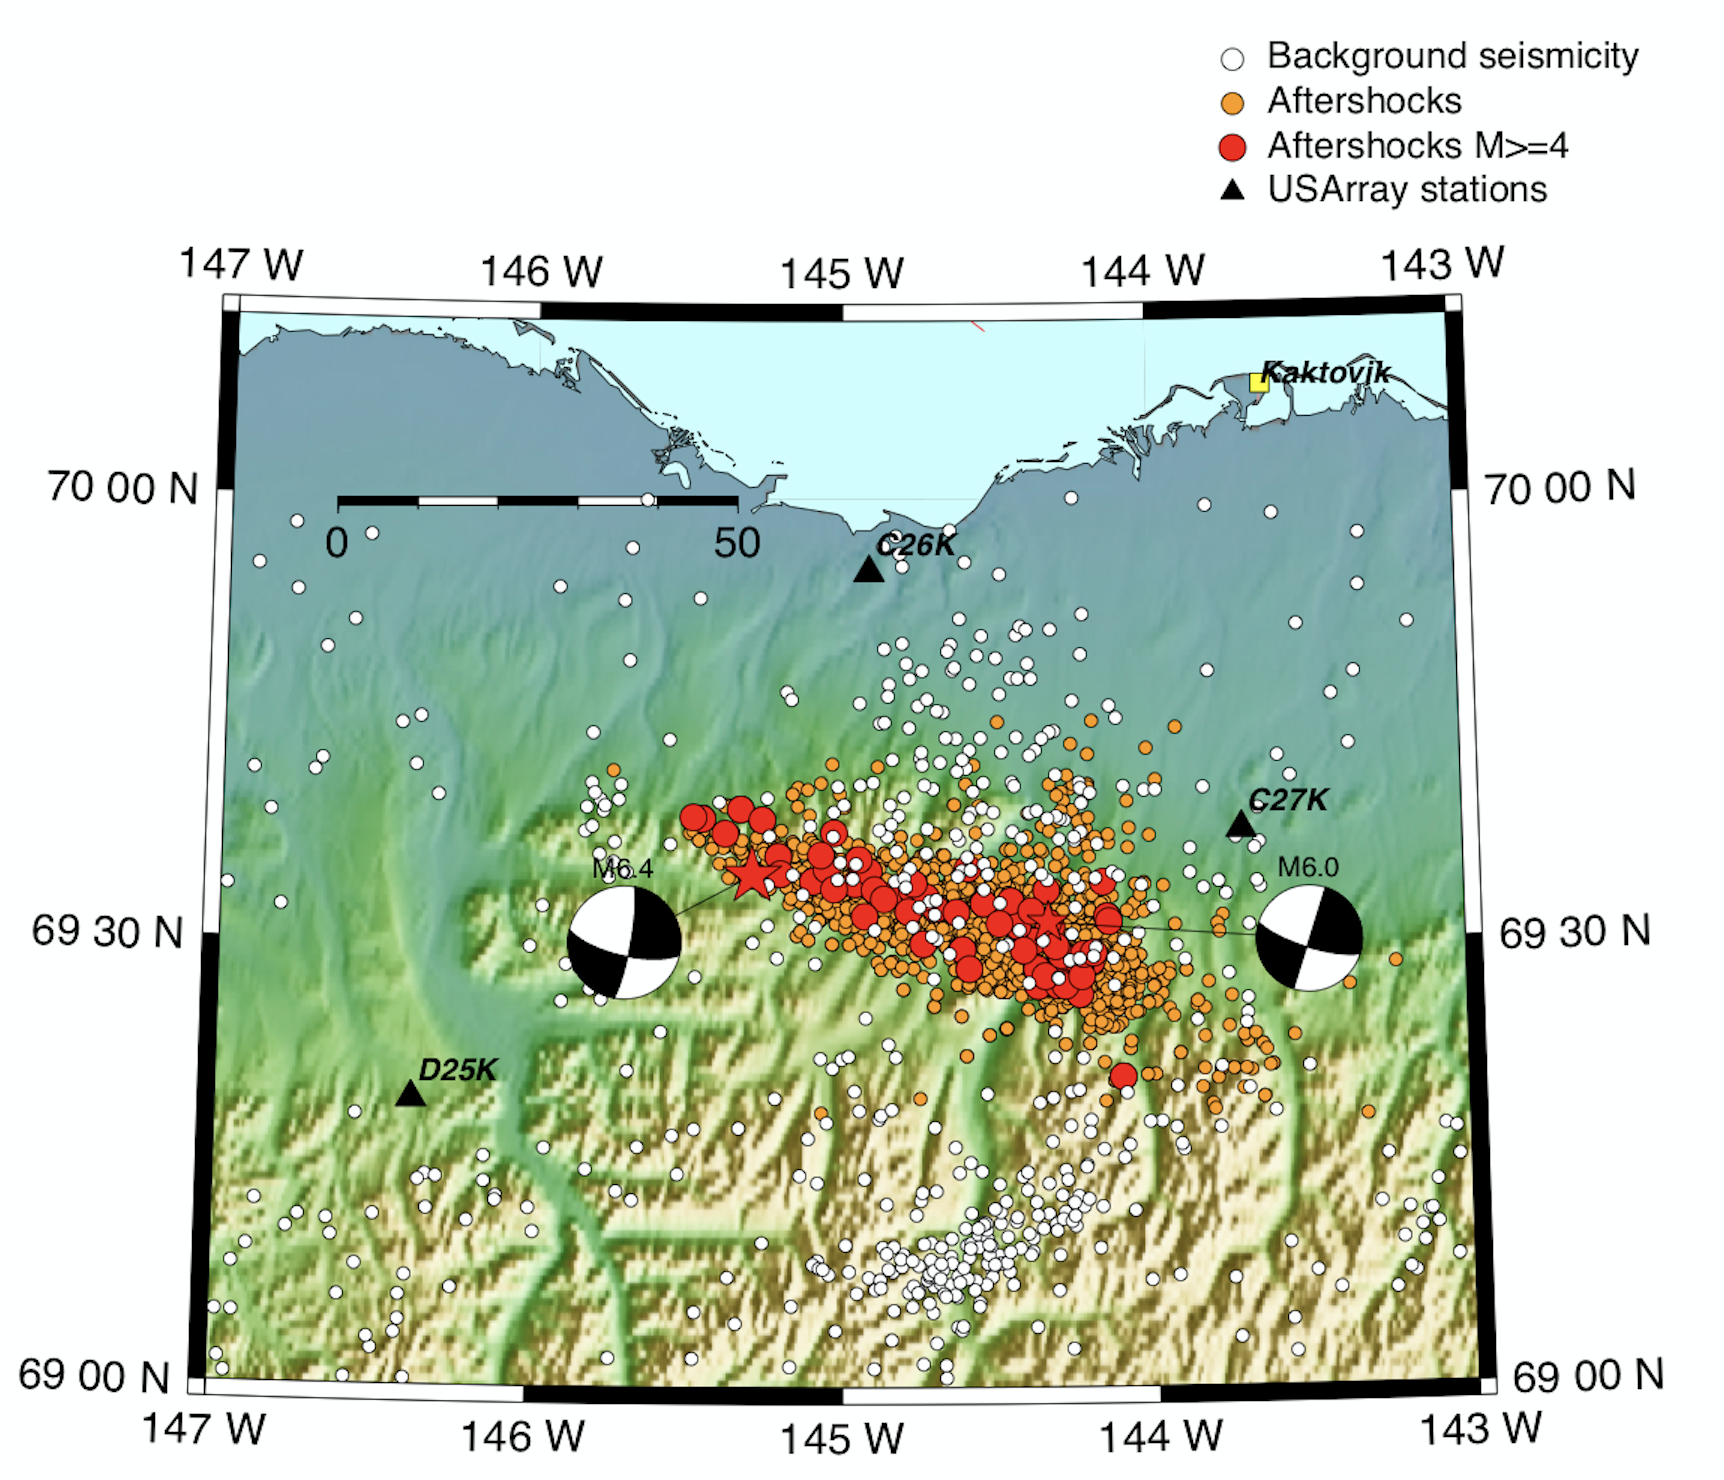 Map showing dense cluster of aftershocks located mainly between a M6.4 earthquake in the west and M6.0 earthquake in the east.